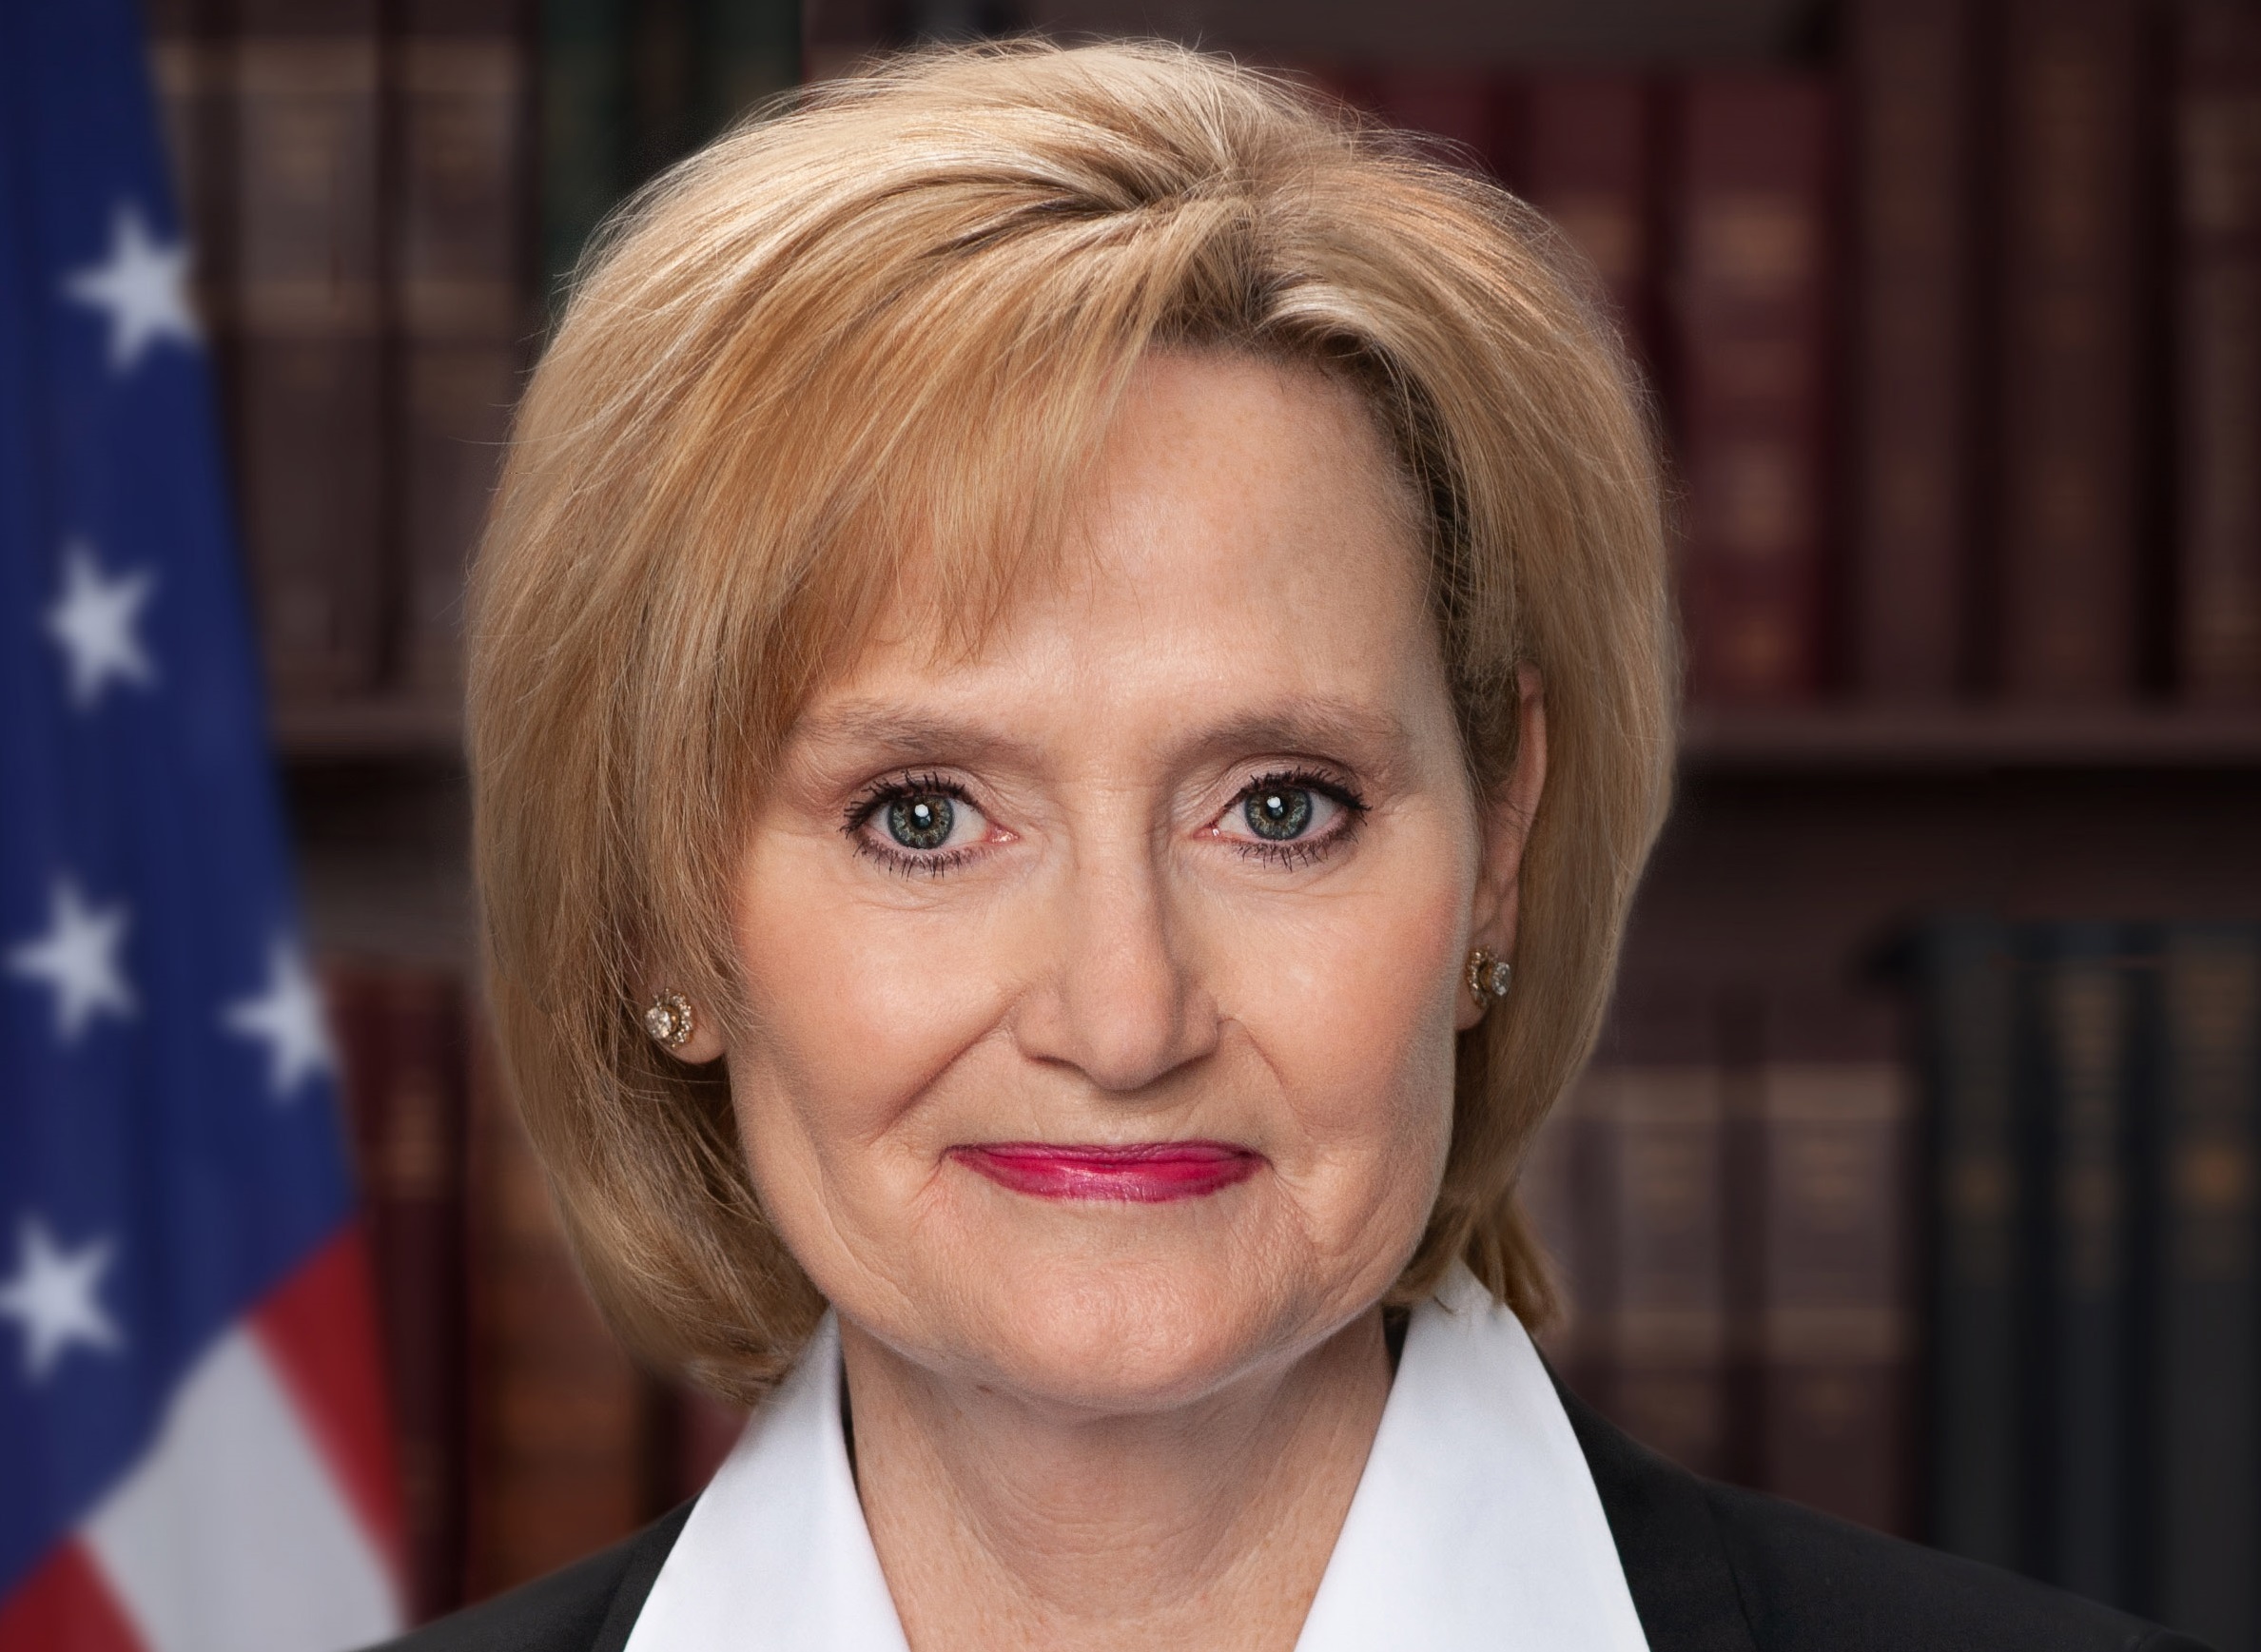 NASW Mississippi Chapter calls for removal of Cindy Hyde-Smith from ballot for U.S. Senate